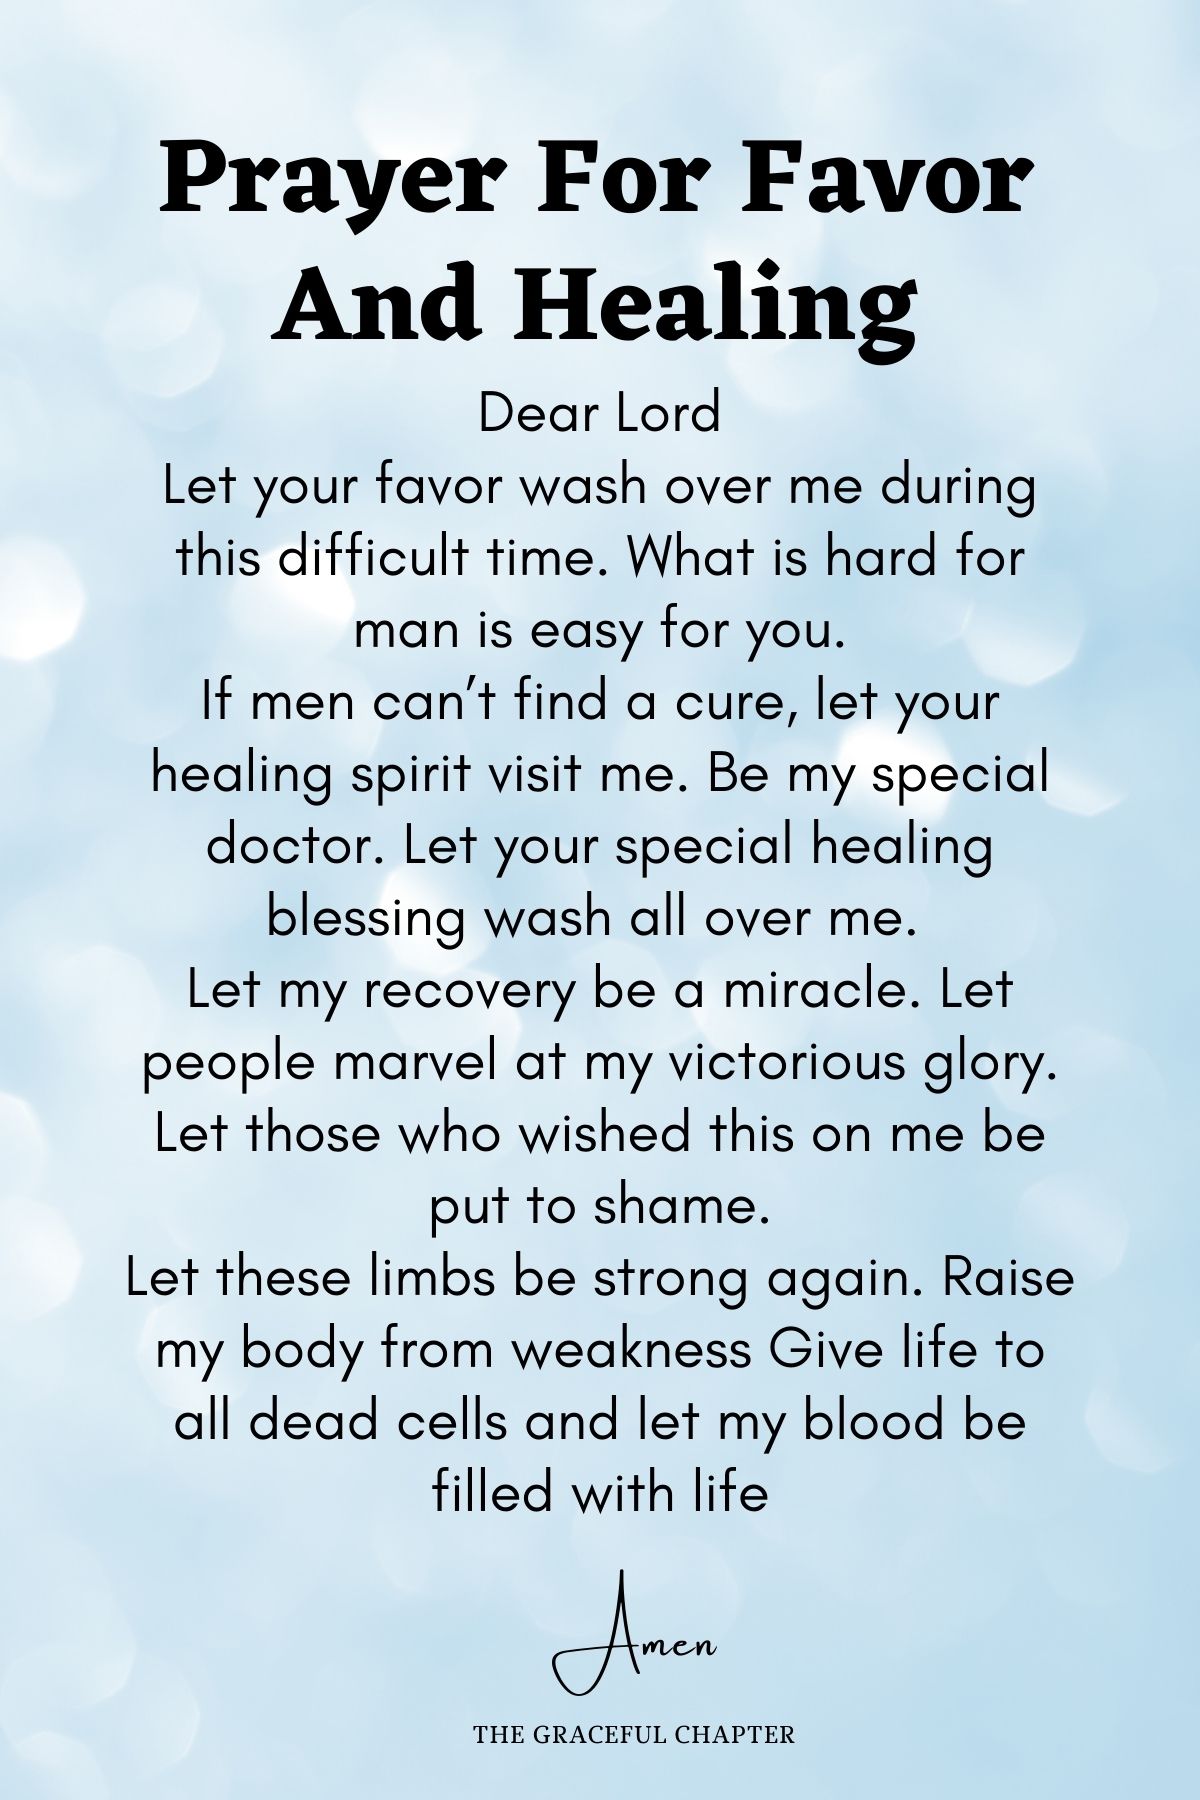 Prayer for favor and healing